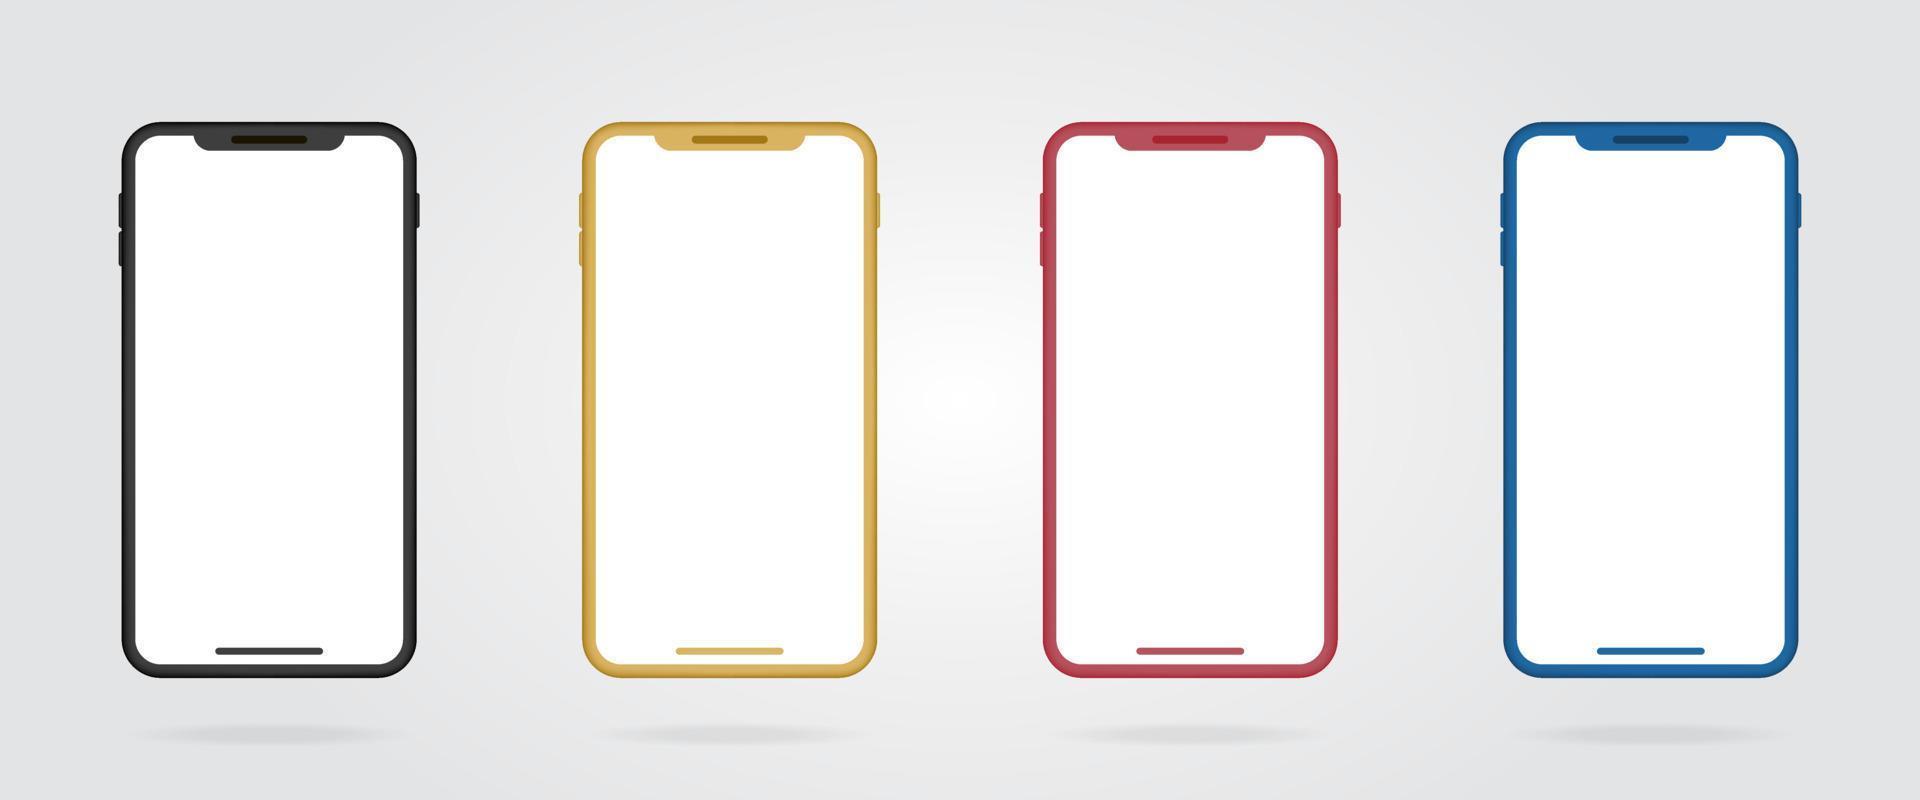 Realistic colored smartphone frames. Black, gold, red and blue mockup mobile phone. Set of color cellphones. Vector